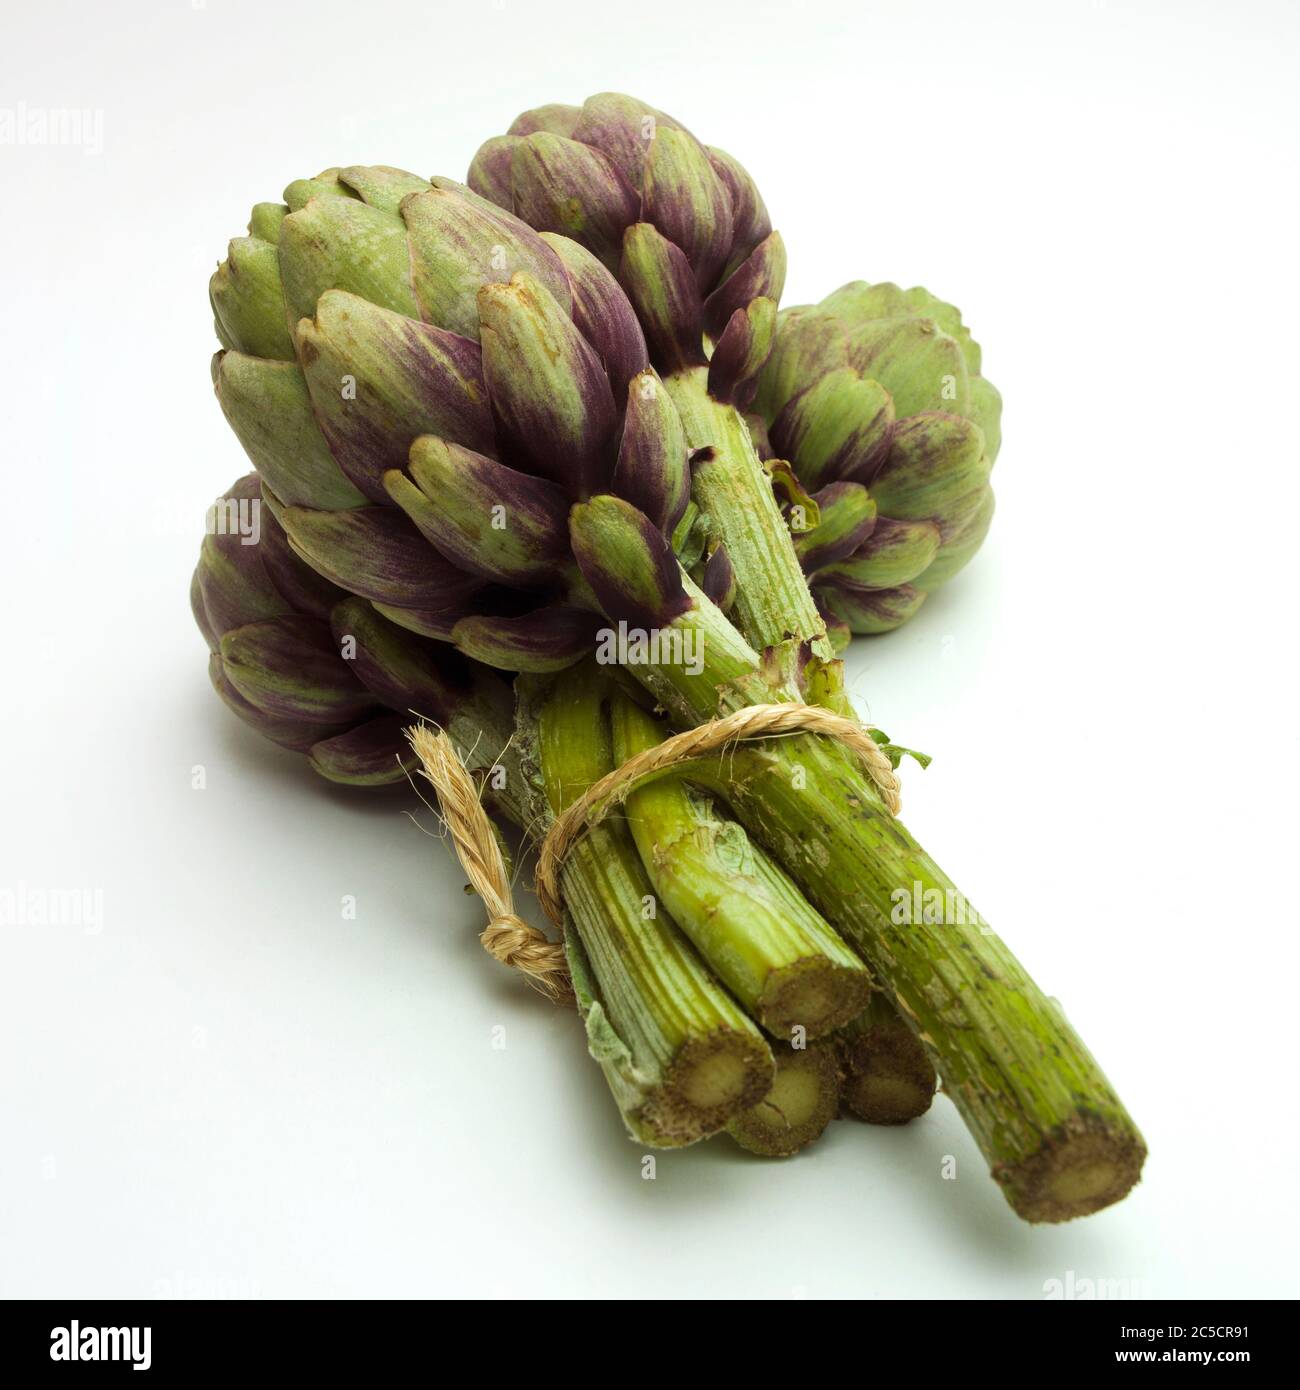 Closeup shot of artichokes isolated on the white background Stock Photo